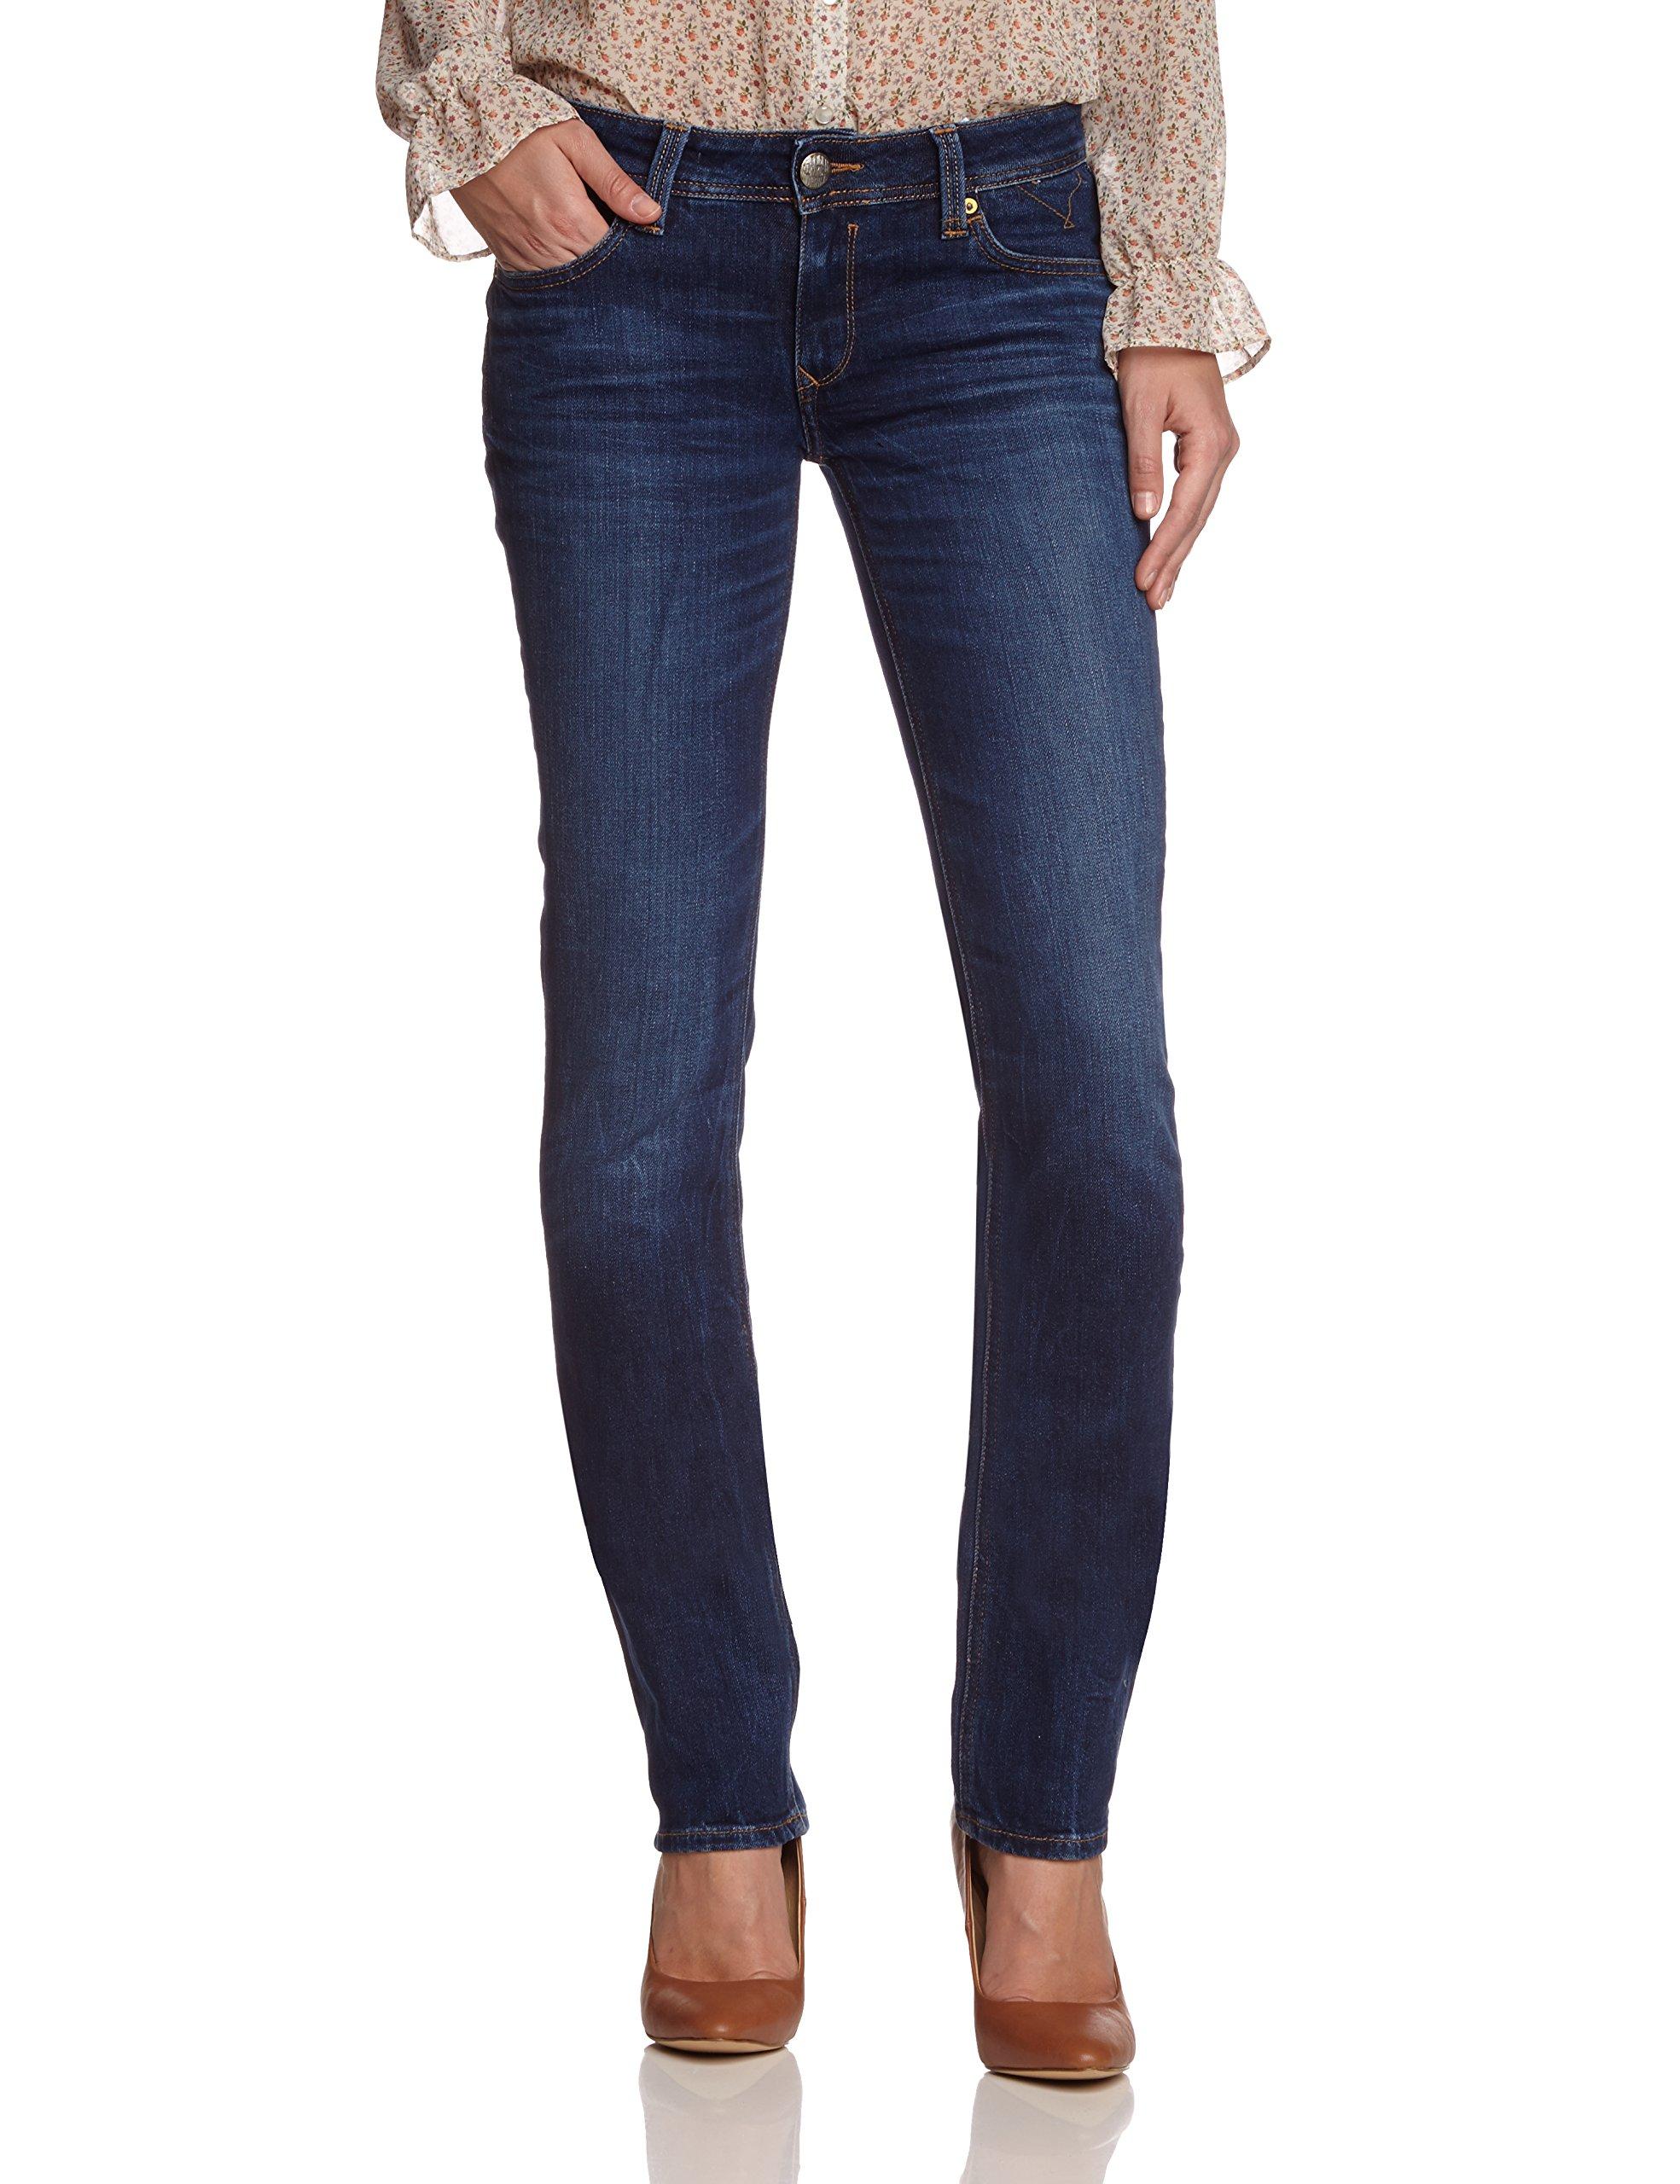 Tommy Hilfiger Hilfiger Denim Suzzy Ndst Straight Plain Or Unicolor Jeans  La Mid Stretch 26w X 34l in Blue - Lyst